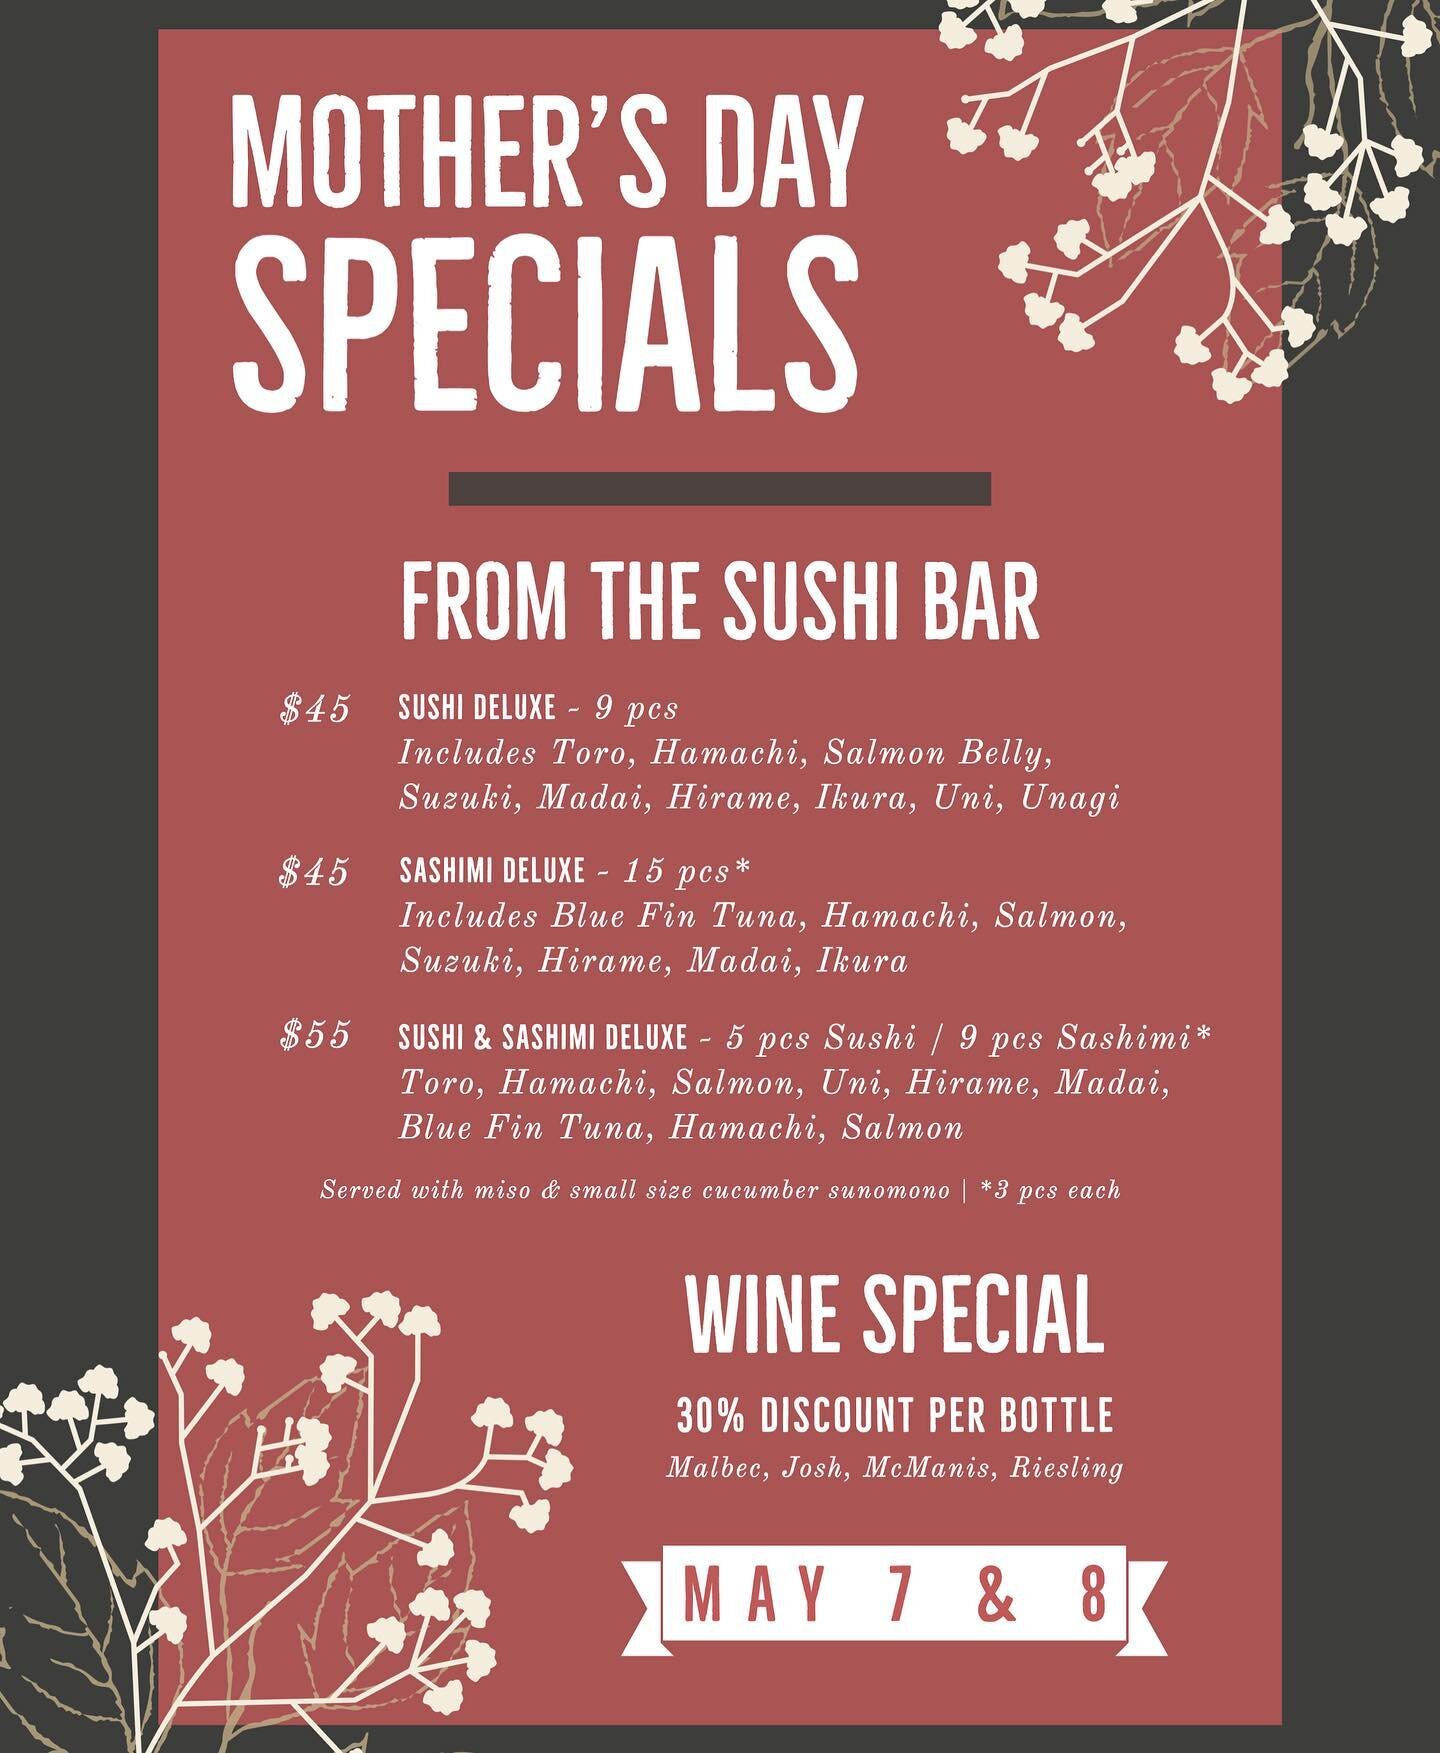 Don&rsquo;t miss Mother&rsquo;s Day weekend with us for some amazing Sushi, Sashimi, and Wine specials!